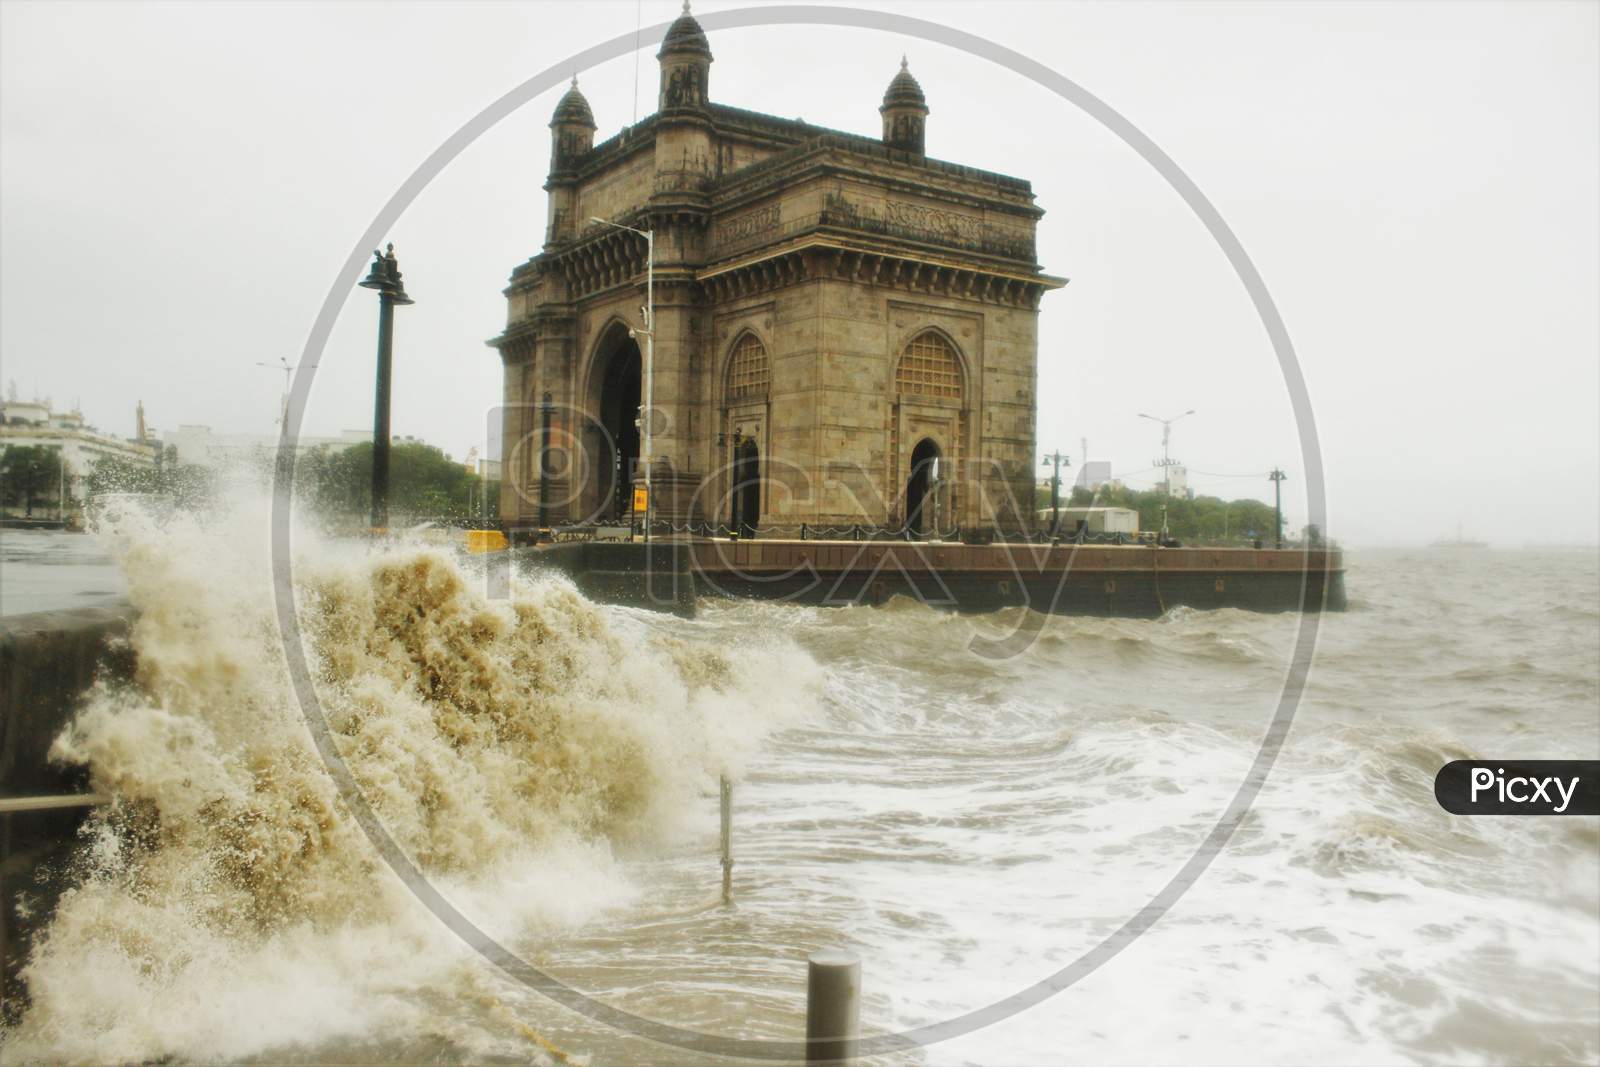 Waves crash at the Gateway of India during high tide in Mumbai, India on July 6, 2020.